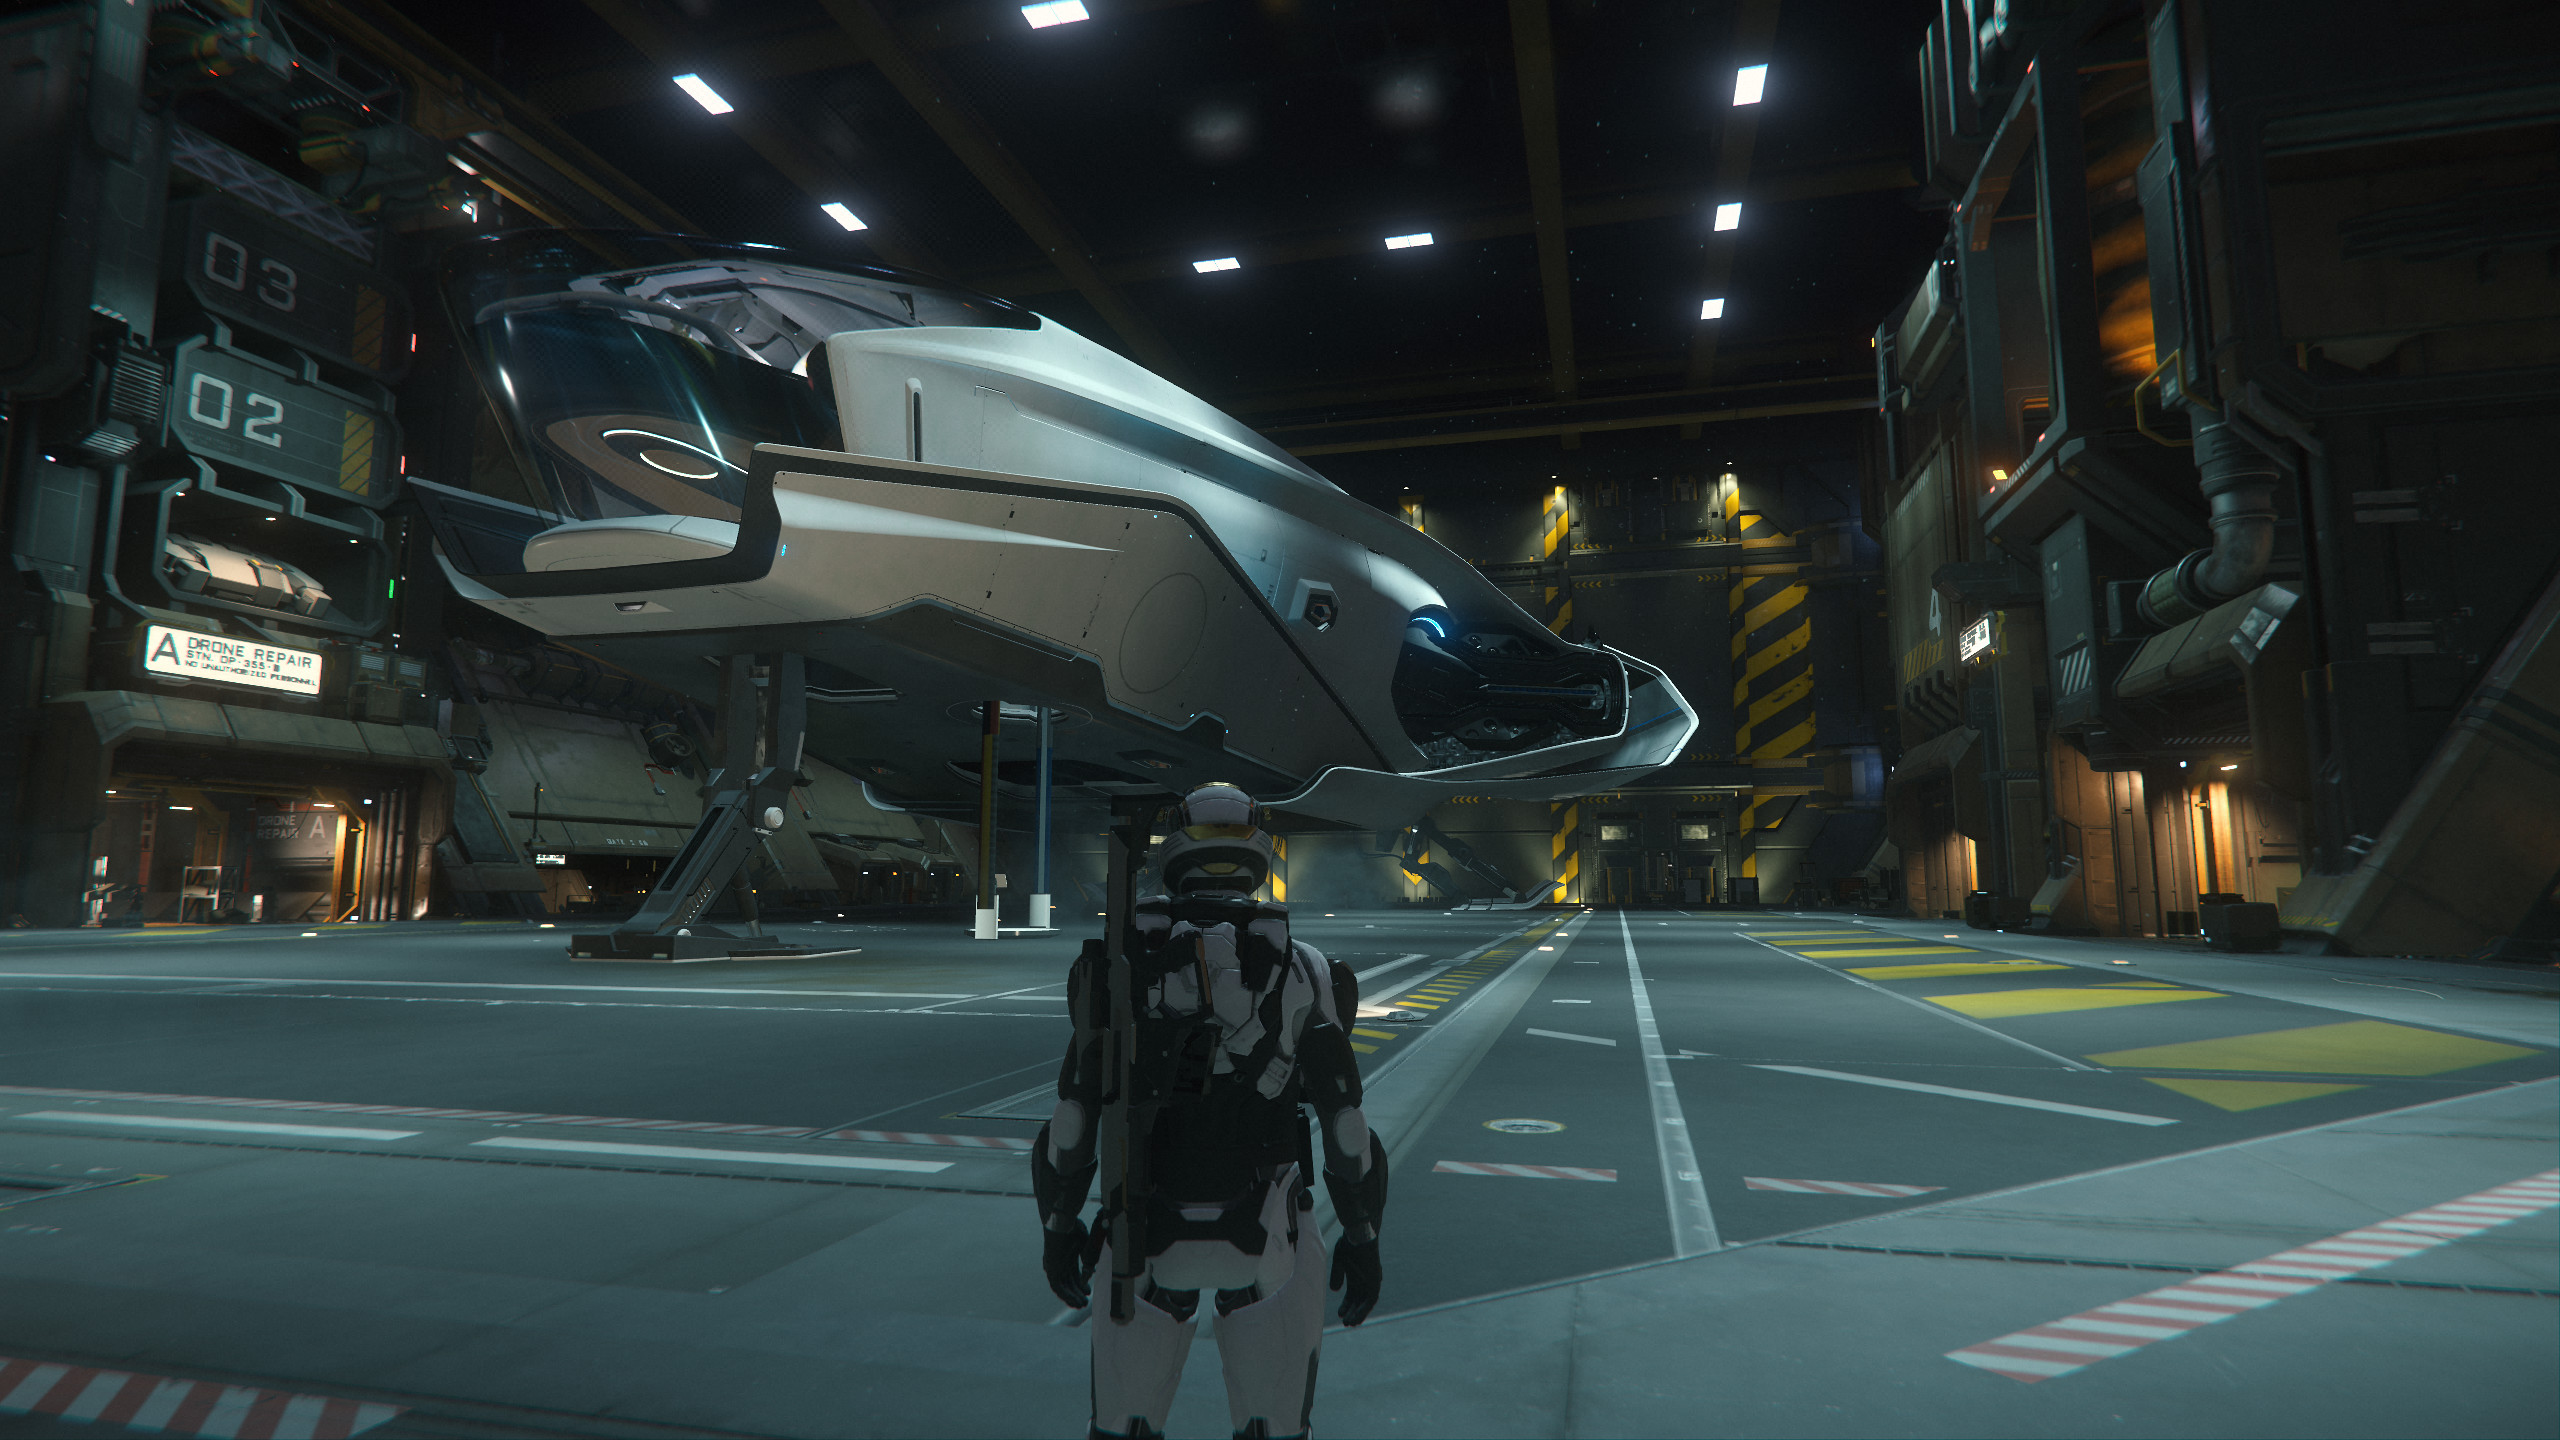 Star Citizen update brings out-of-this-world immersion